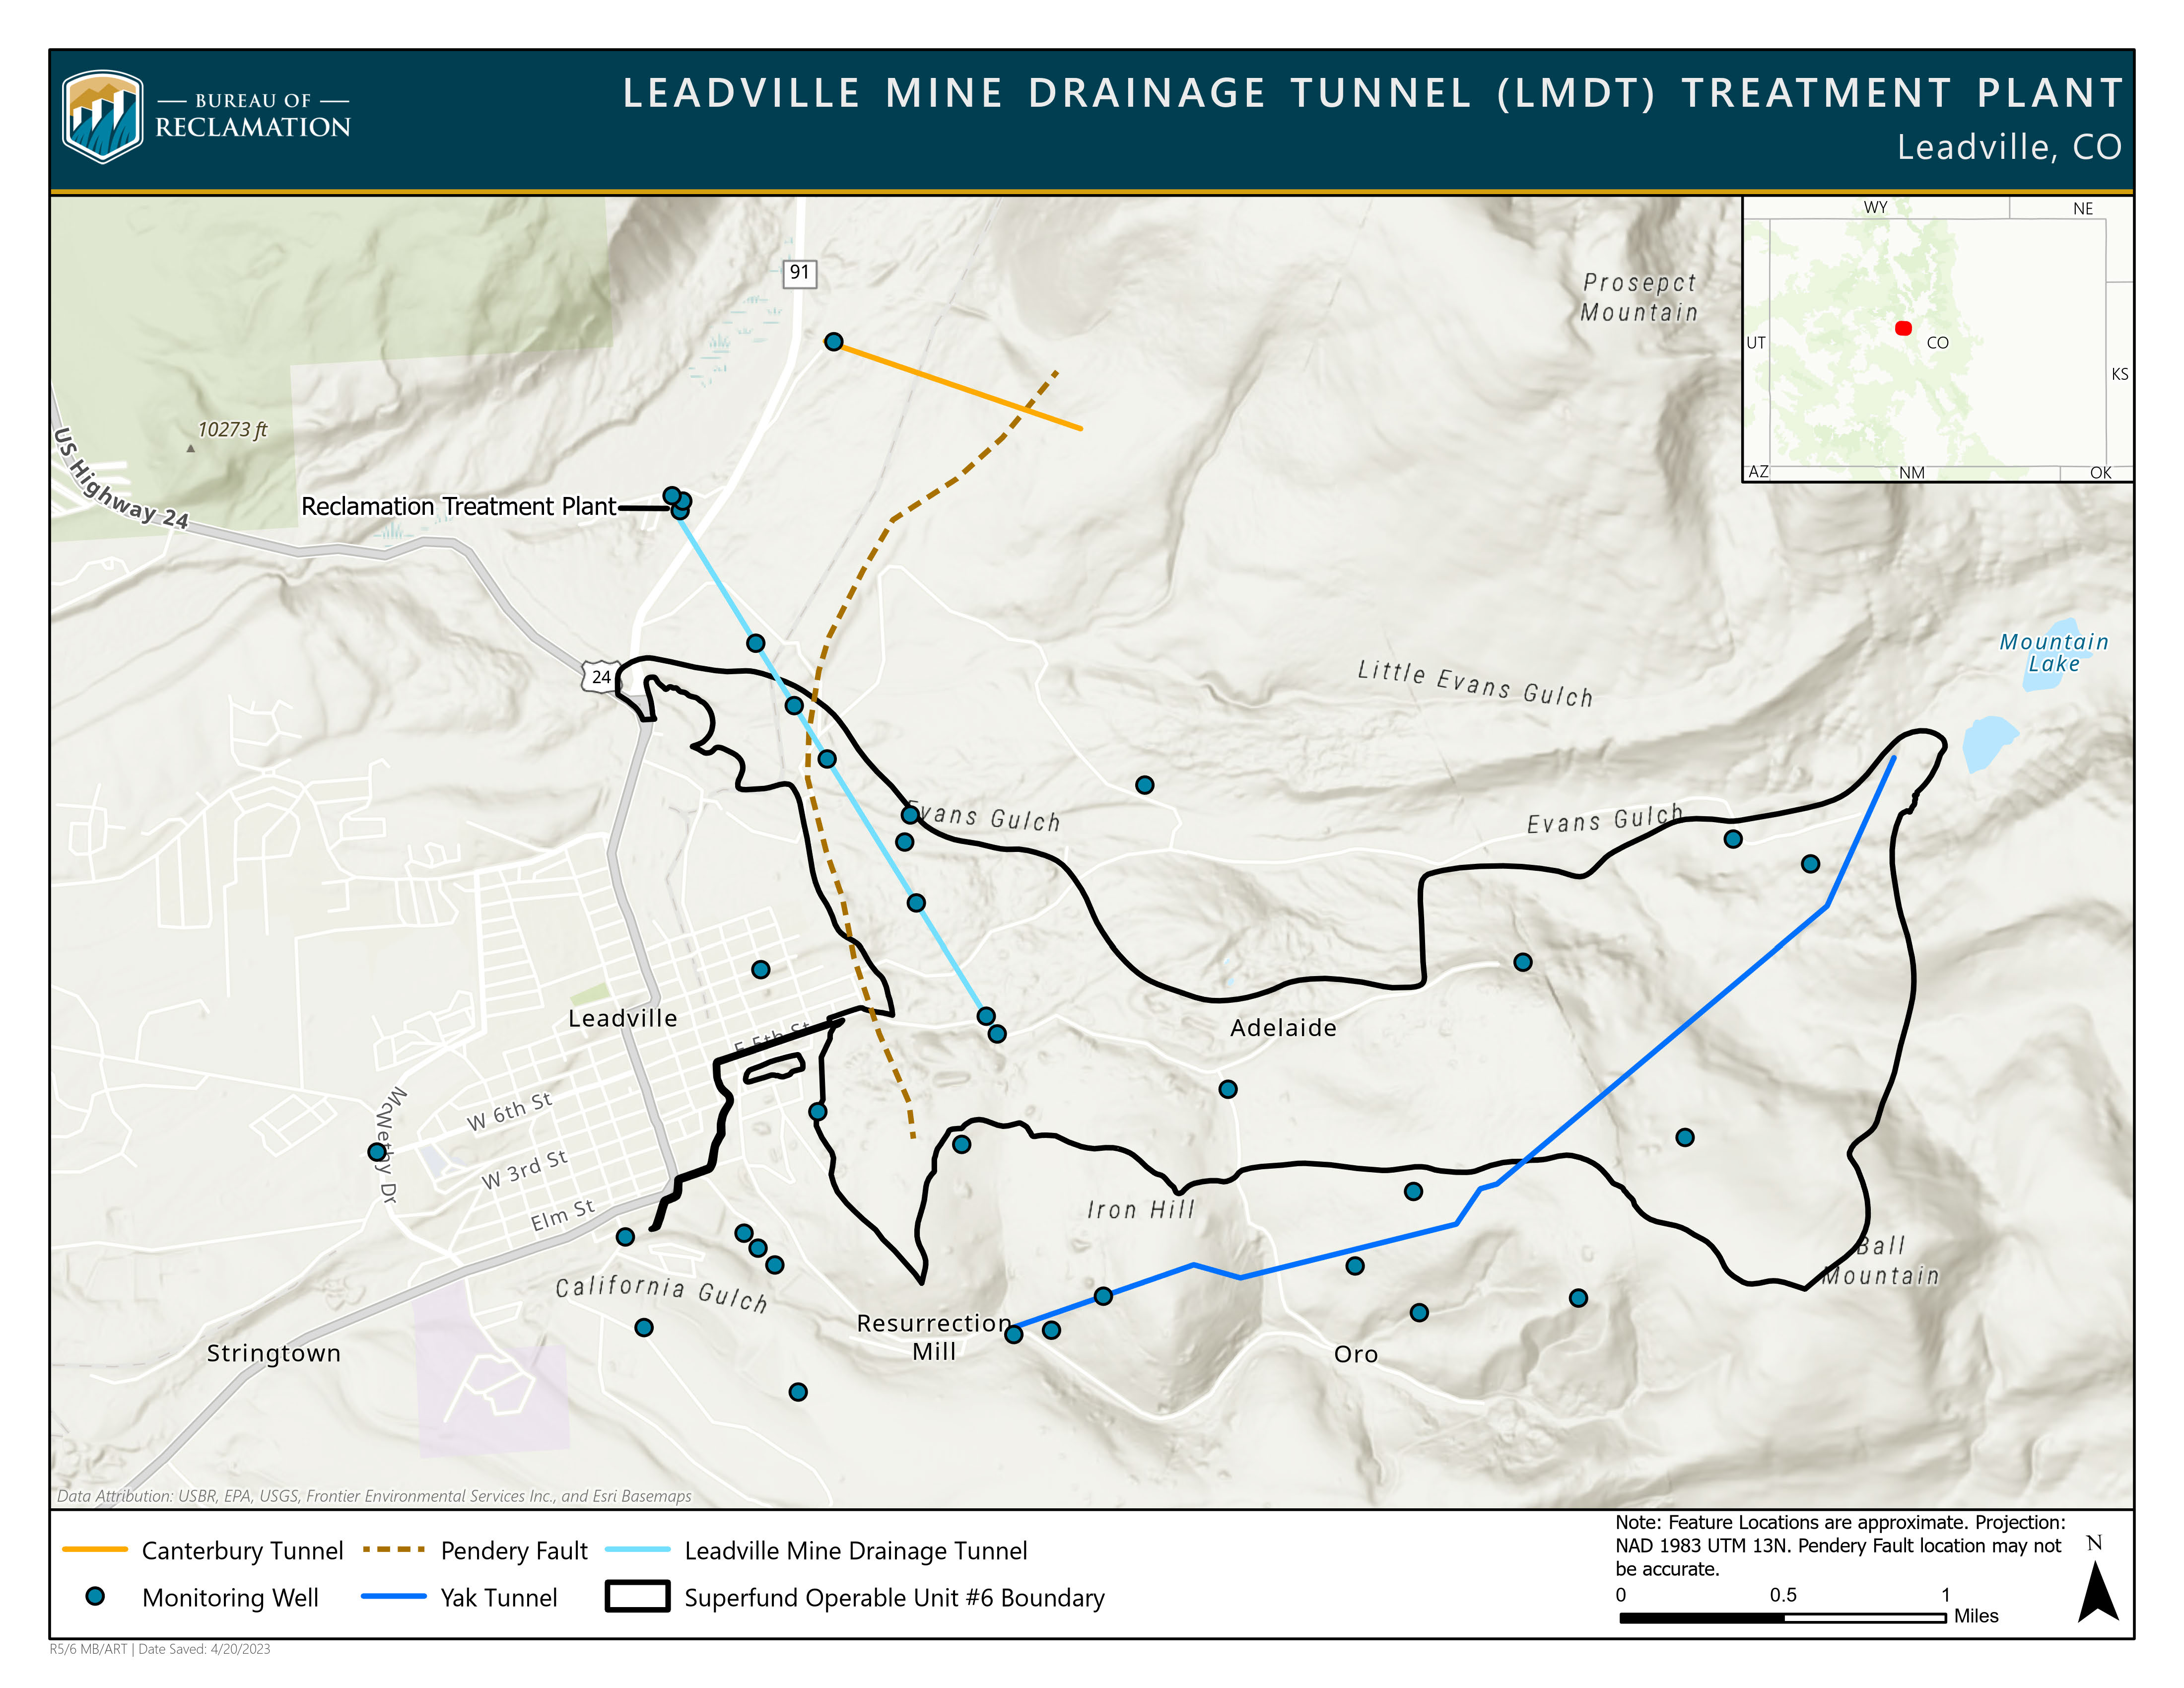 The Leadville Mine Drainage Tunnel (LMDT) and the LMDT Treatment Plant sit outsite the town of Leadville, Colorado near Highway 91. The Canterbury Tunnel, Yak Tunnel, Pendery Fault, and numerous monitoring wells are also nearby.